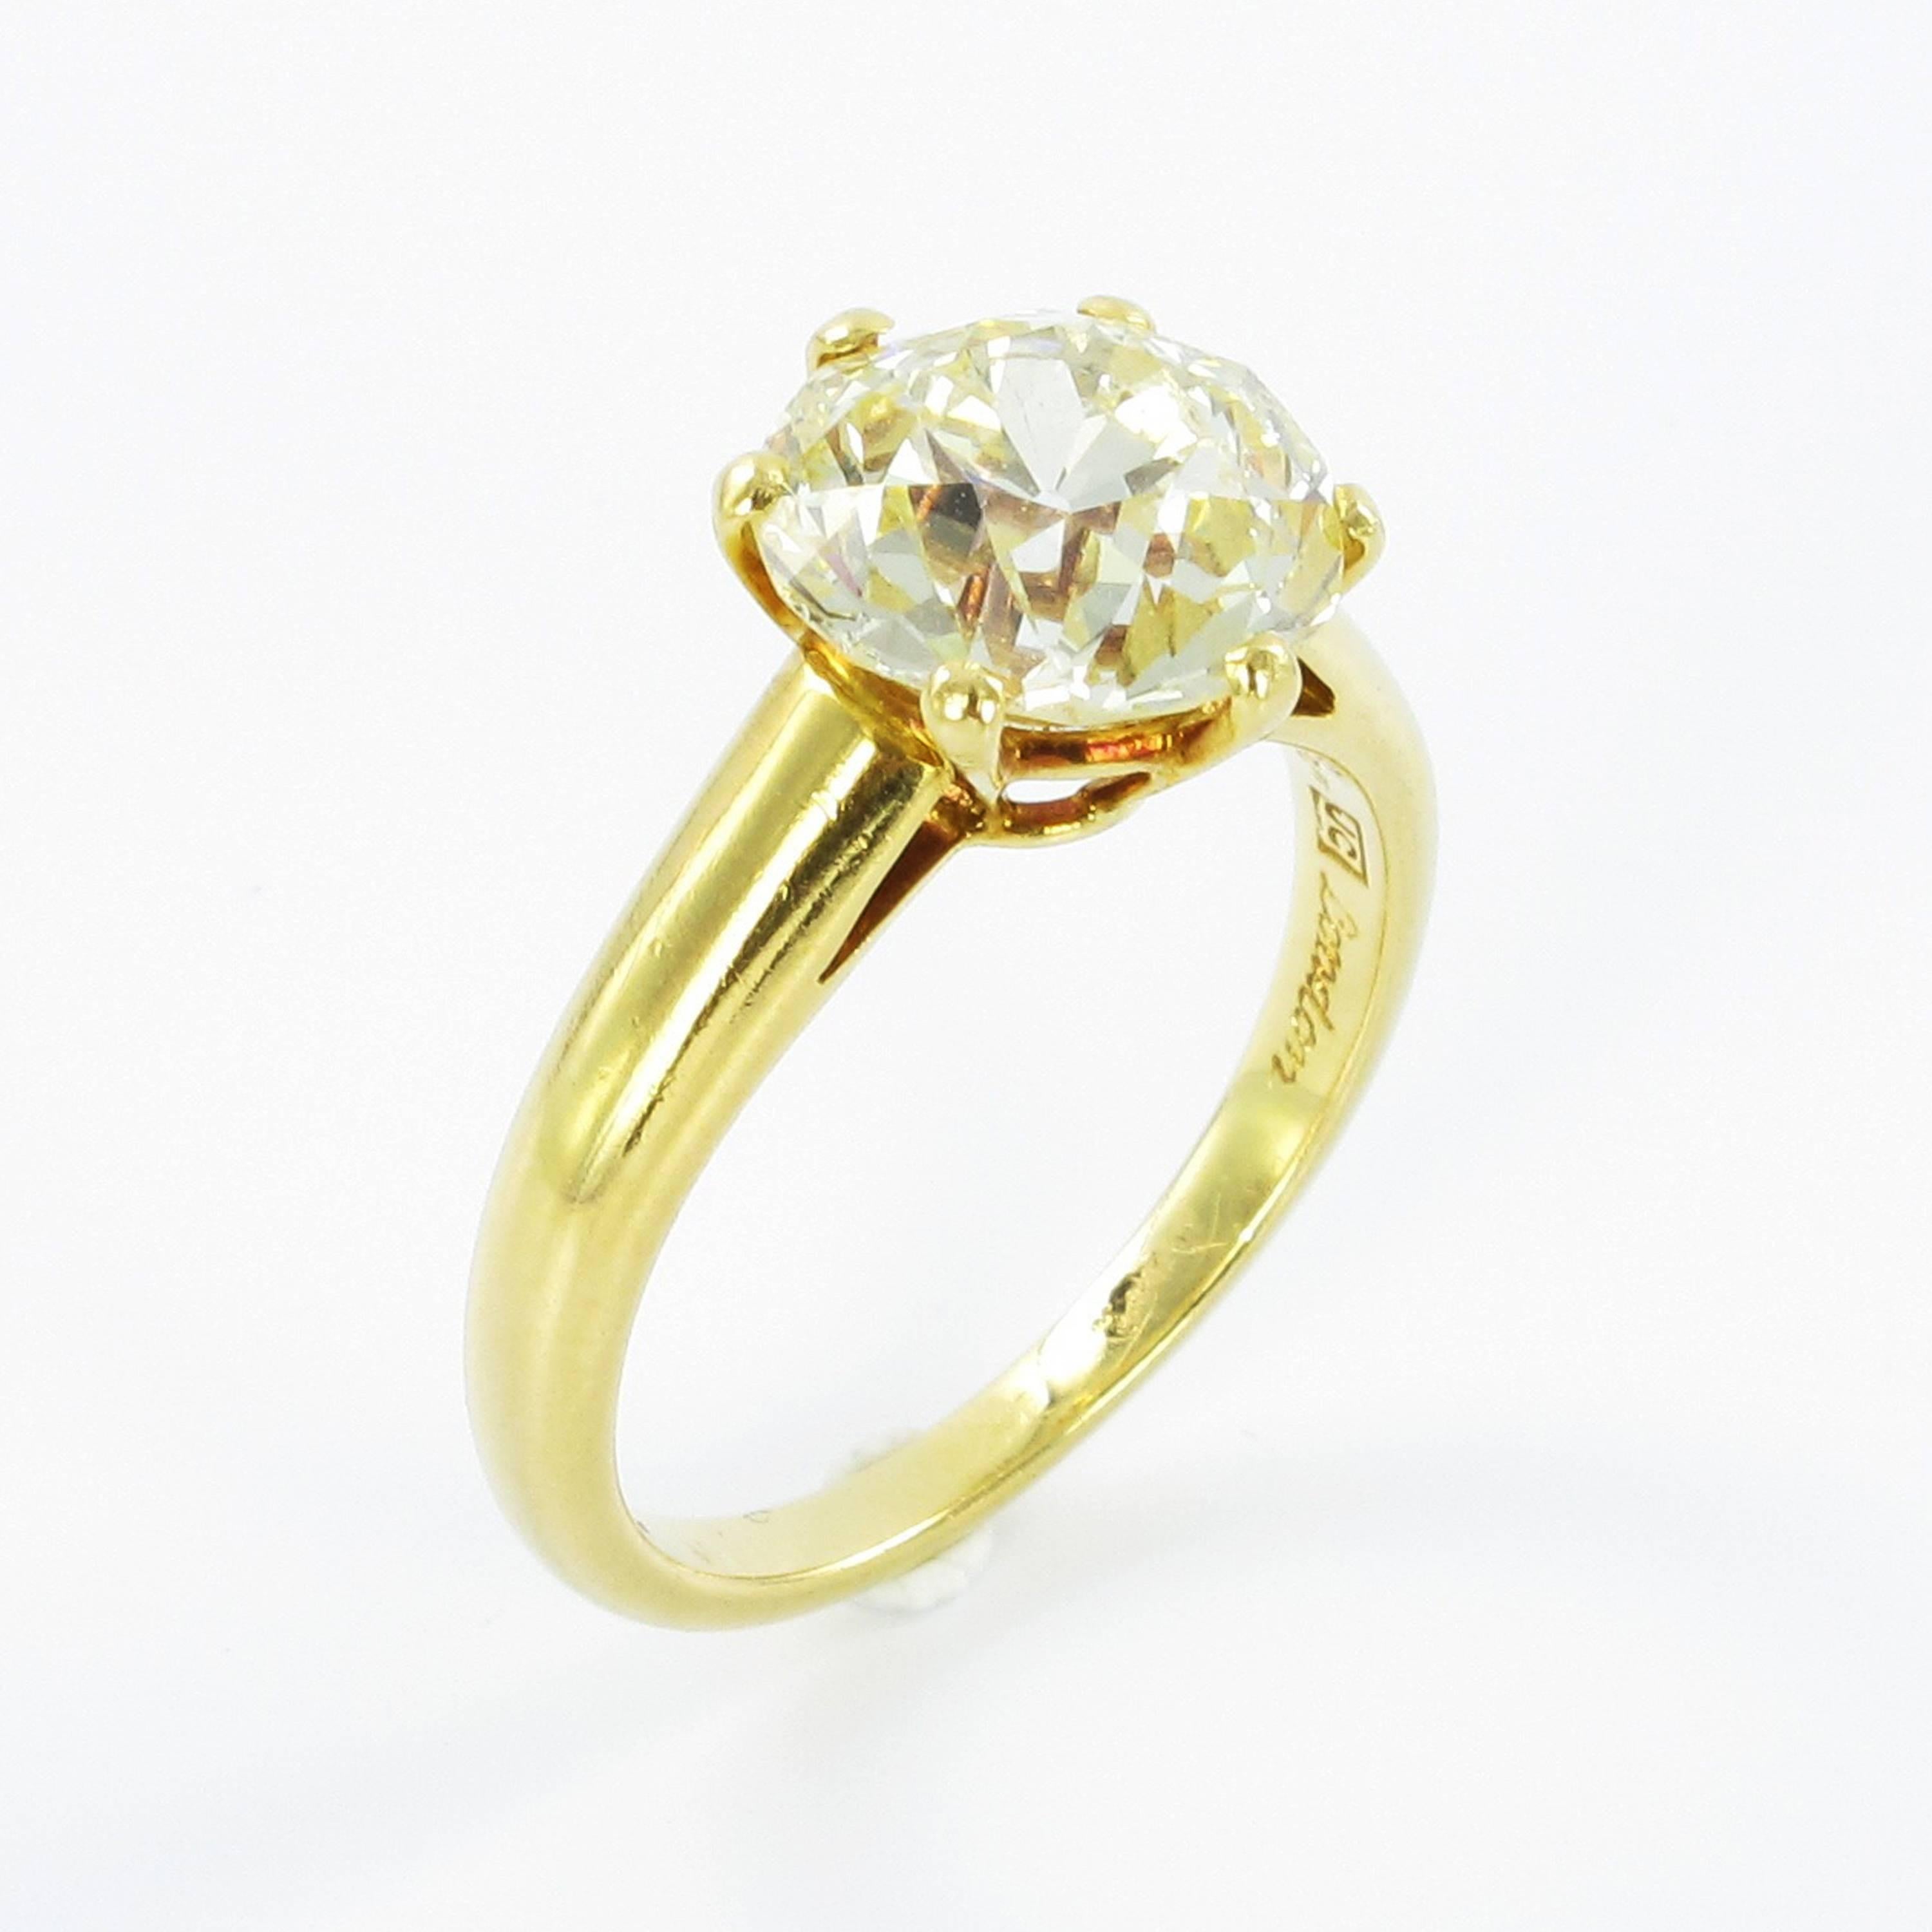 This ring is set with a brilliant-cut diamond weighing 3.04 carats (P-Q colour, si1 clarity). Mounted in a six-prong 18k yellow gold setting. Signed 'Mtd. Cartier London'. Number 47586. Hallmarks. Size 49, US 5